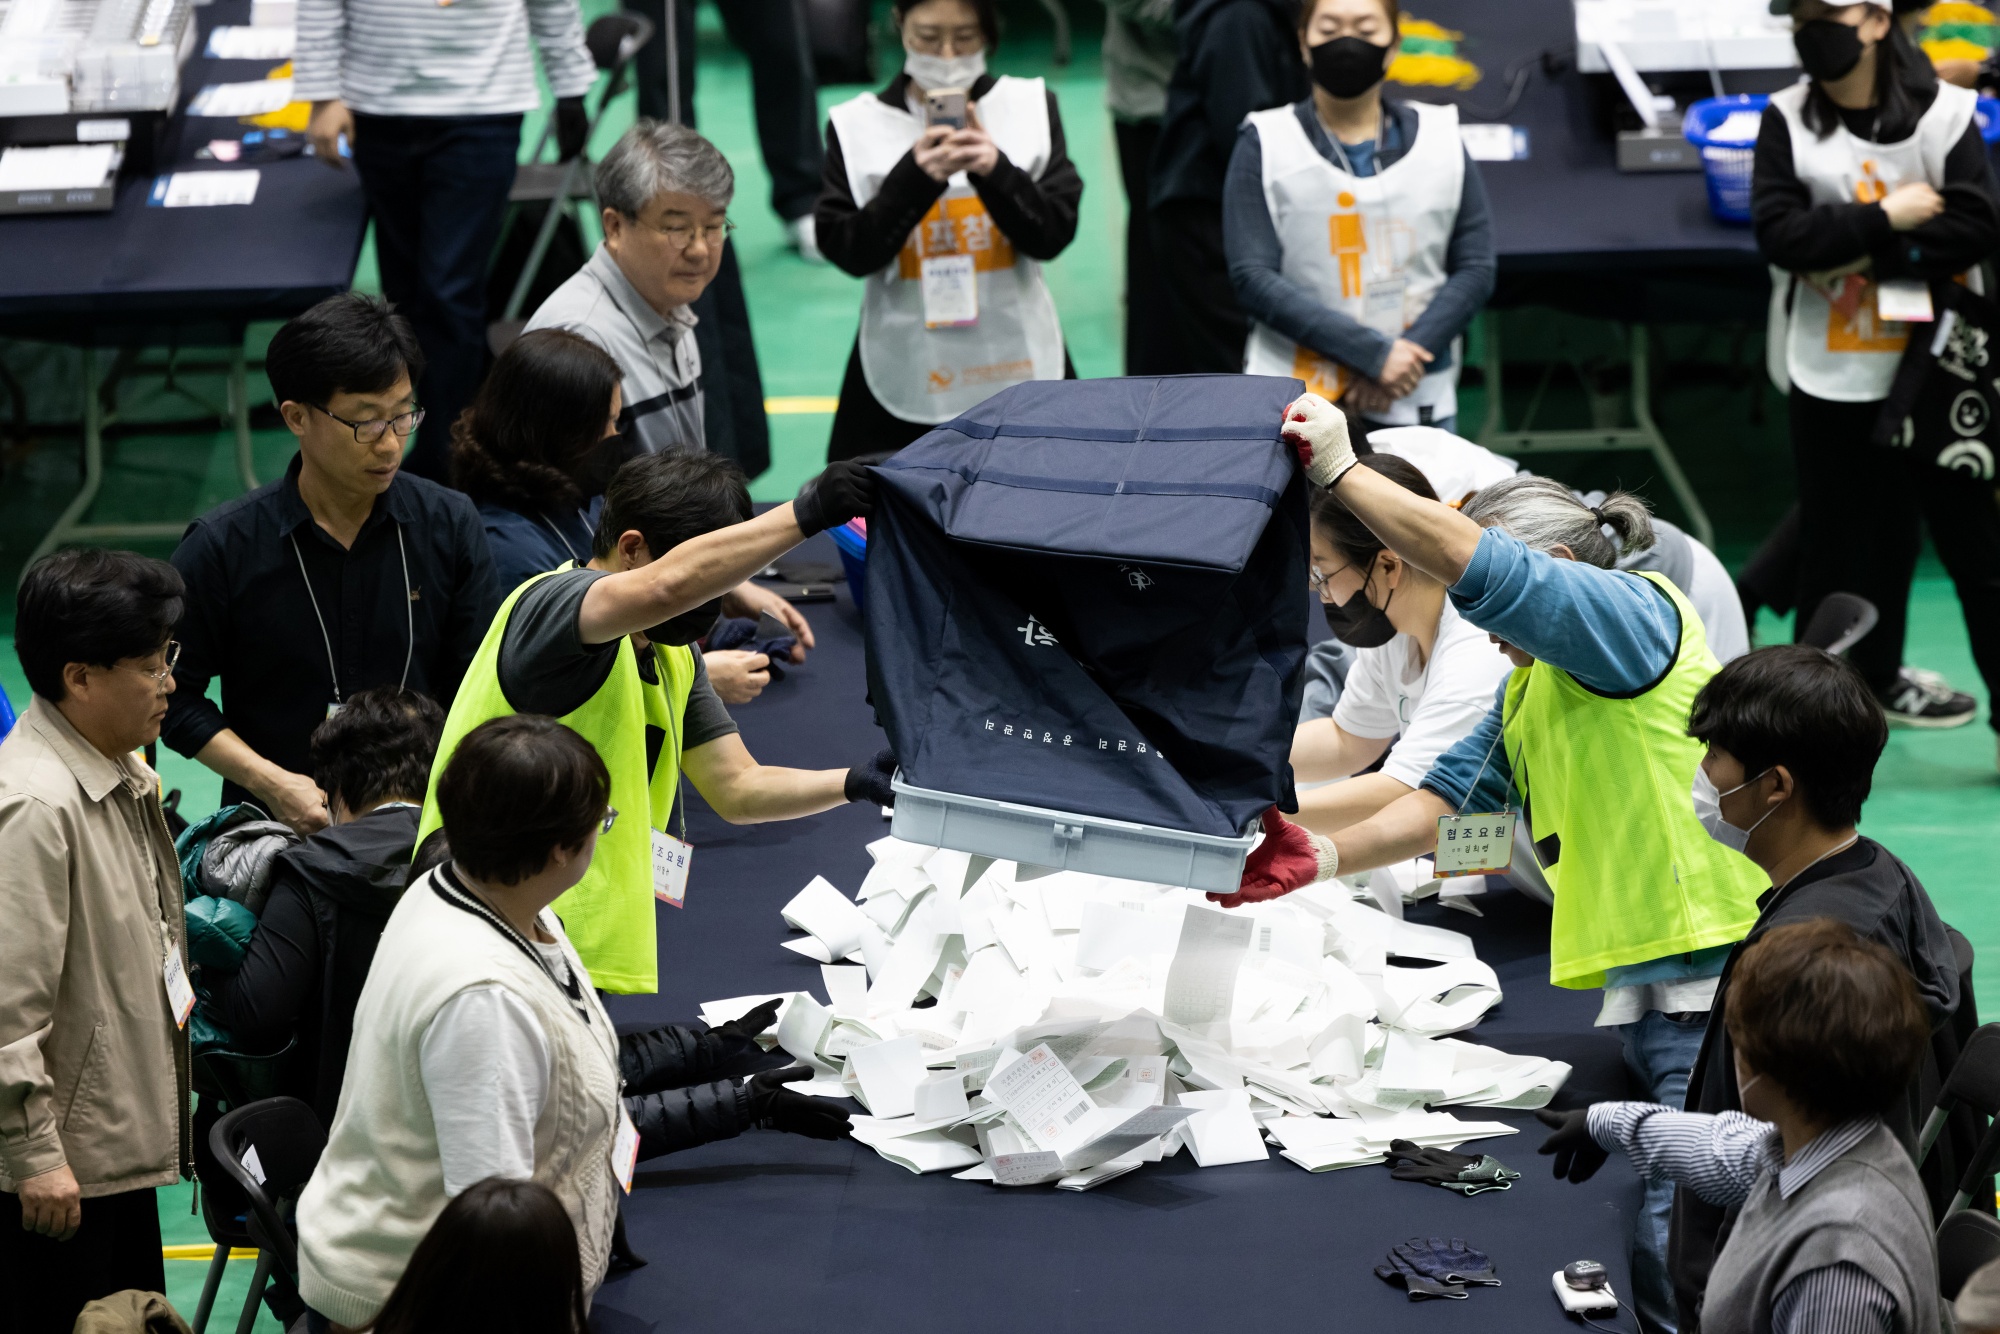 Officials count ballots following a parliamentary election on April 10.